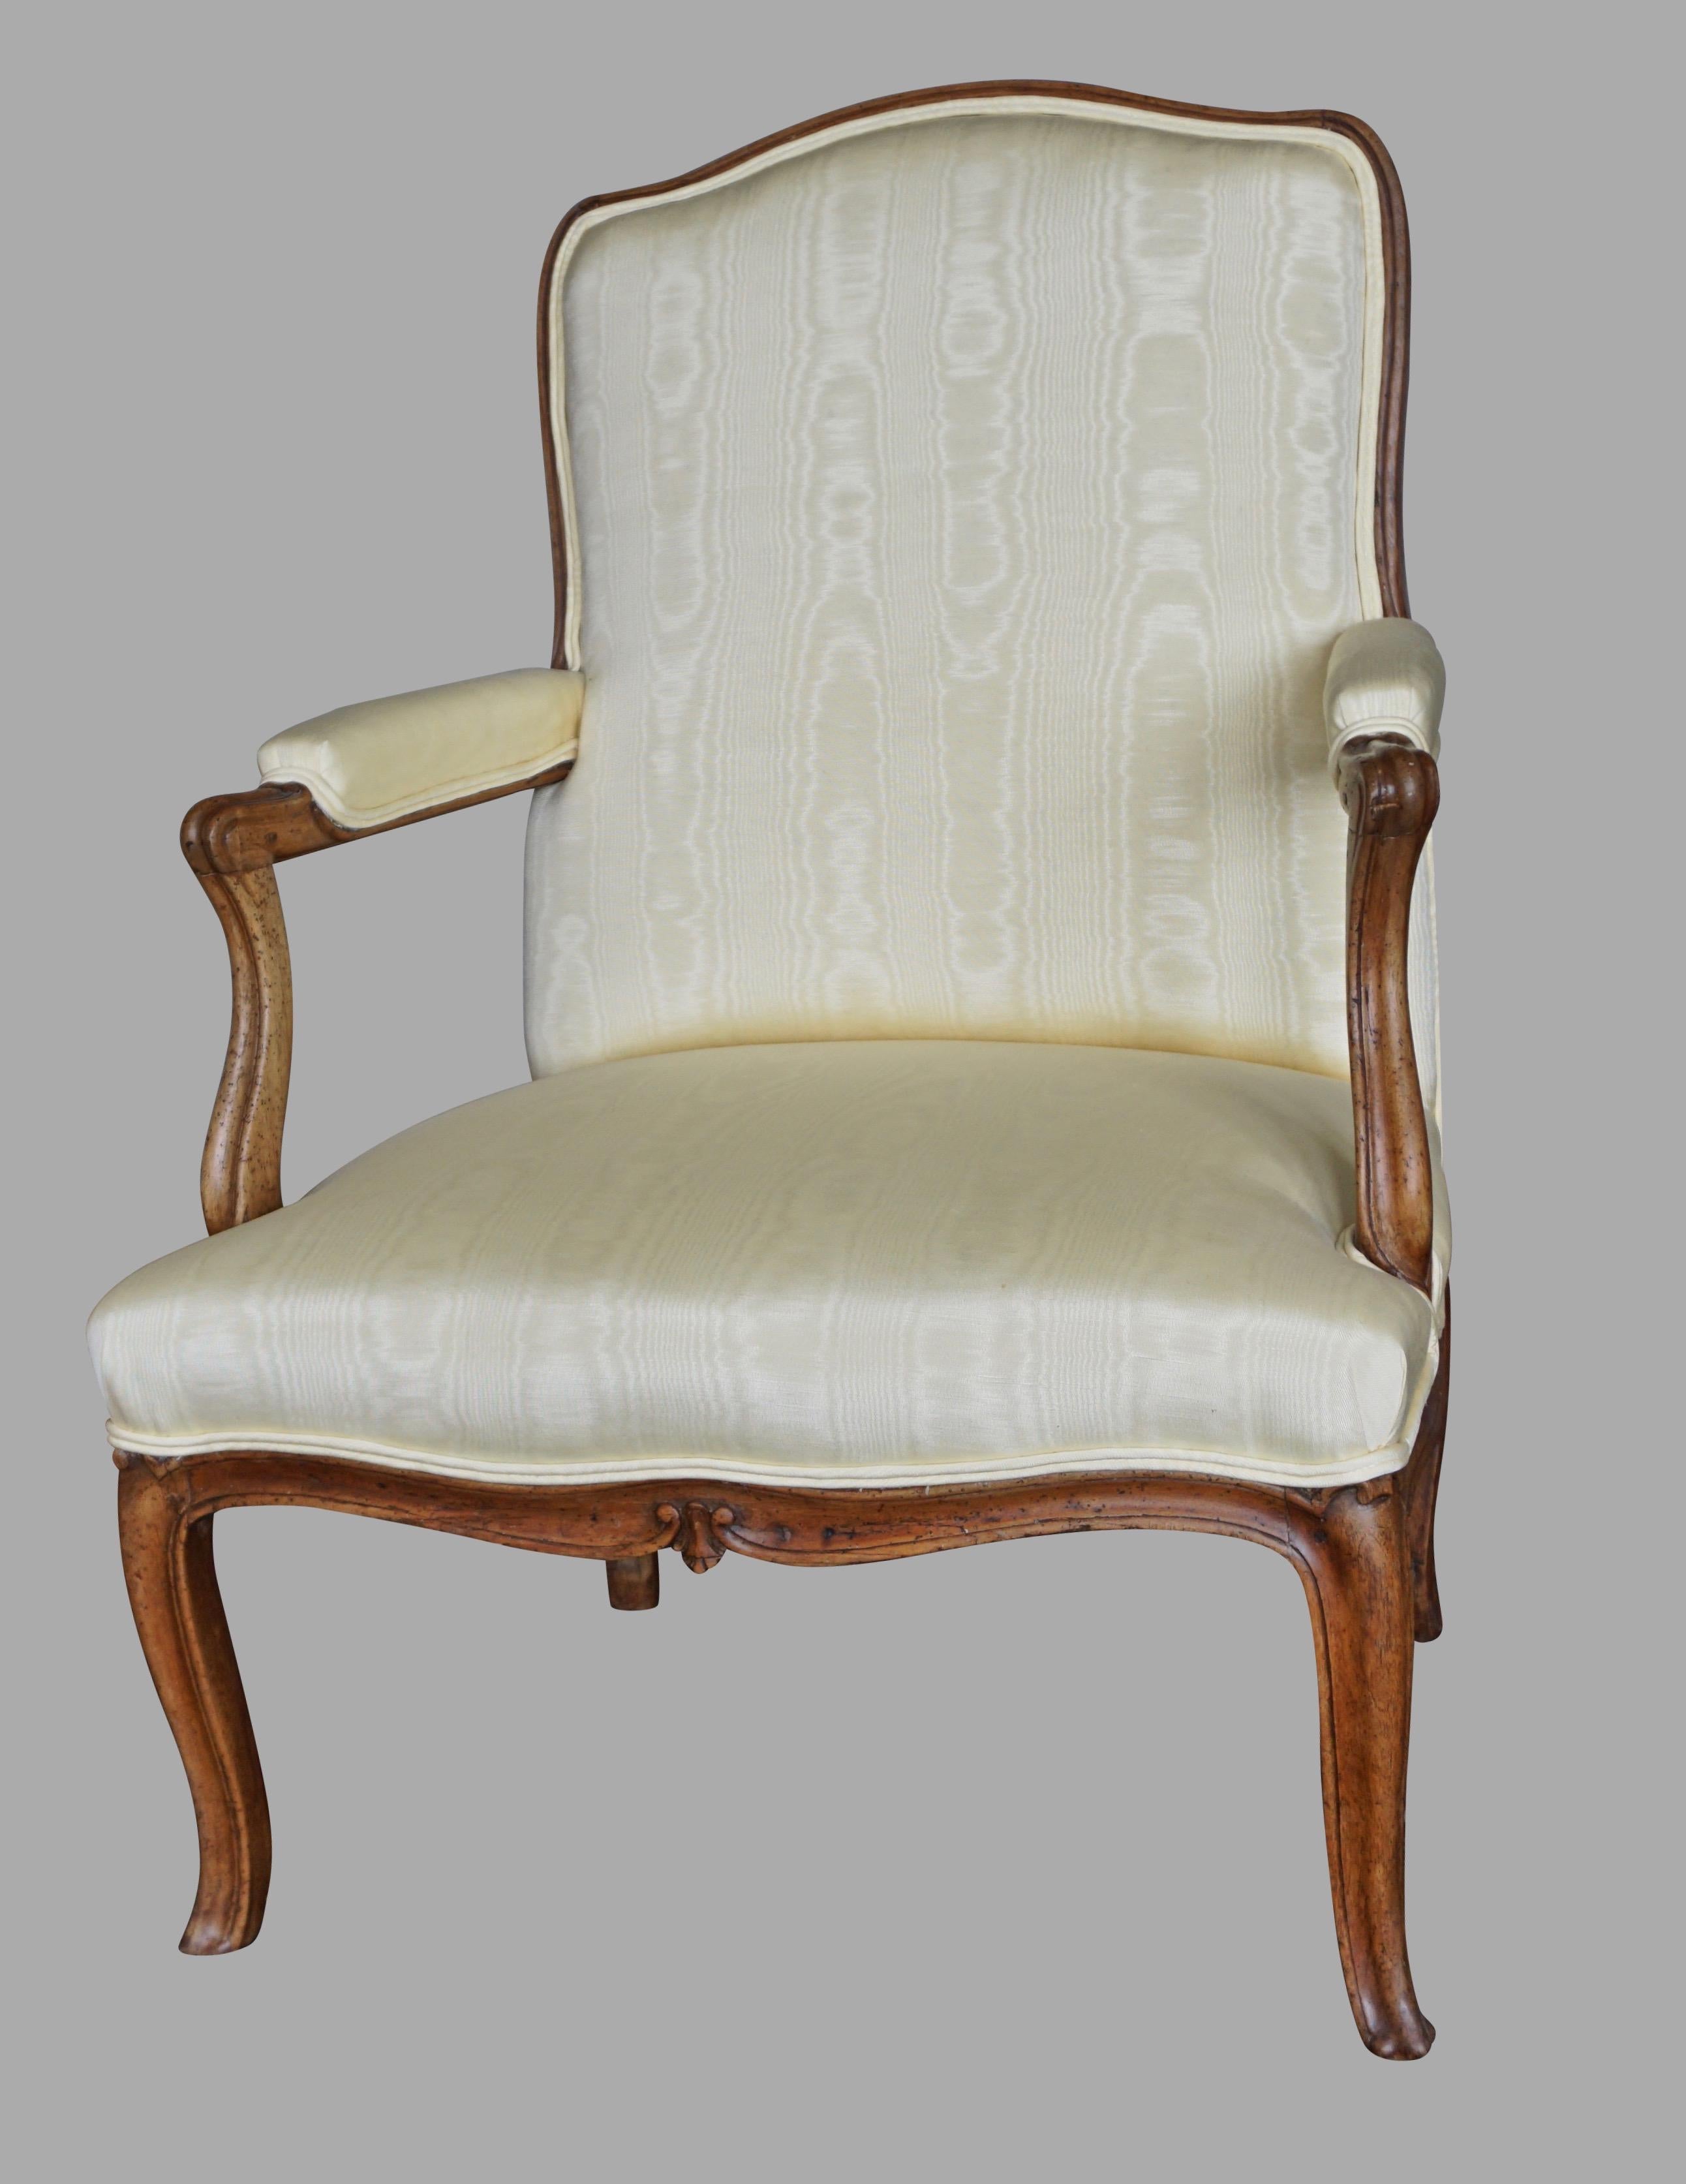 A handsome and generously proportioned French Louis XV period yellow silk upholstered walnut open armchair with a carved front edge. A well-proportioned and comfortable armchair of good scale. Originally with a central stretcher now absent. Circa